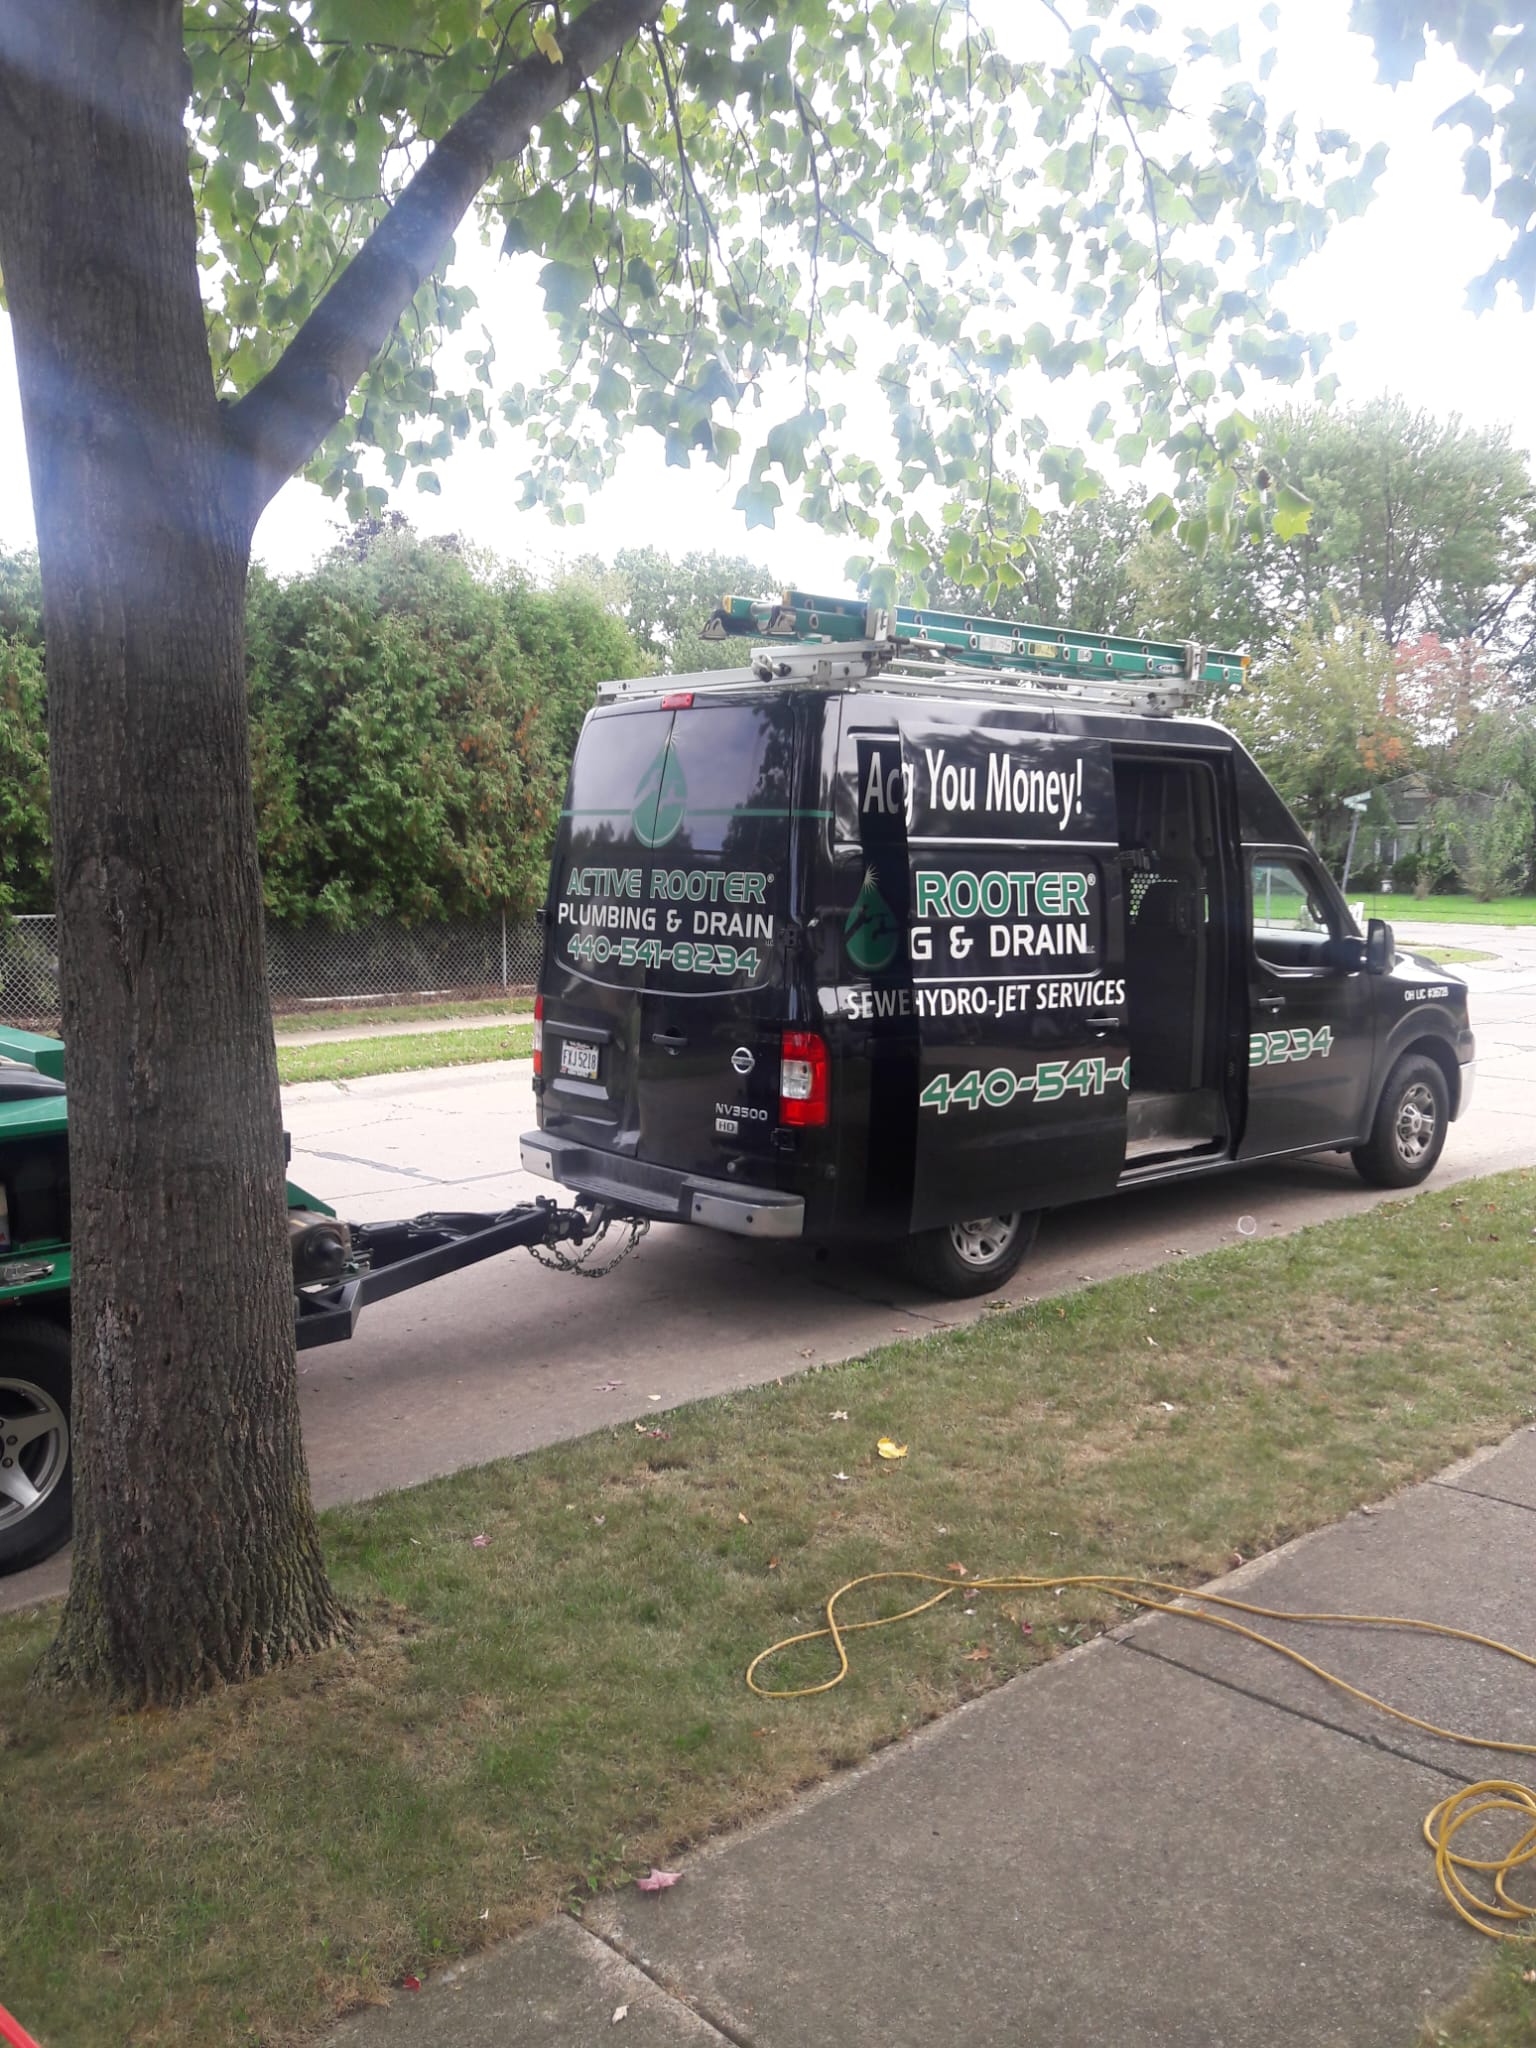 What are the benefits of hiring Active Rooter Plumbing & Drain Cleaning for sewer line cleaning in Elyria?